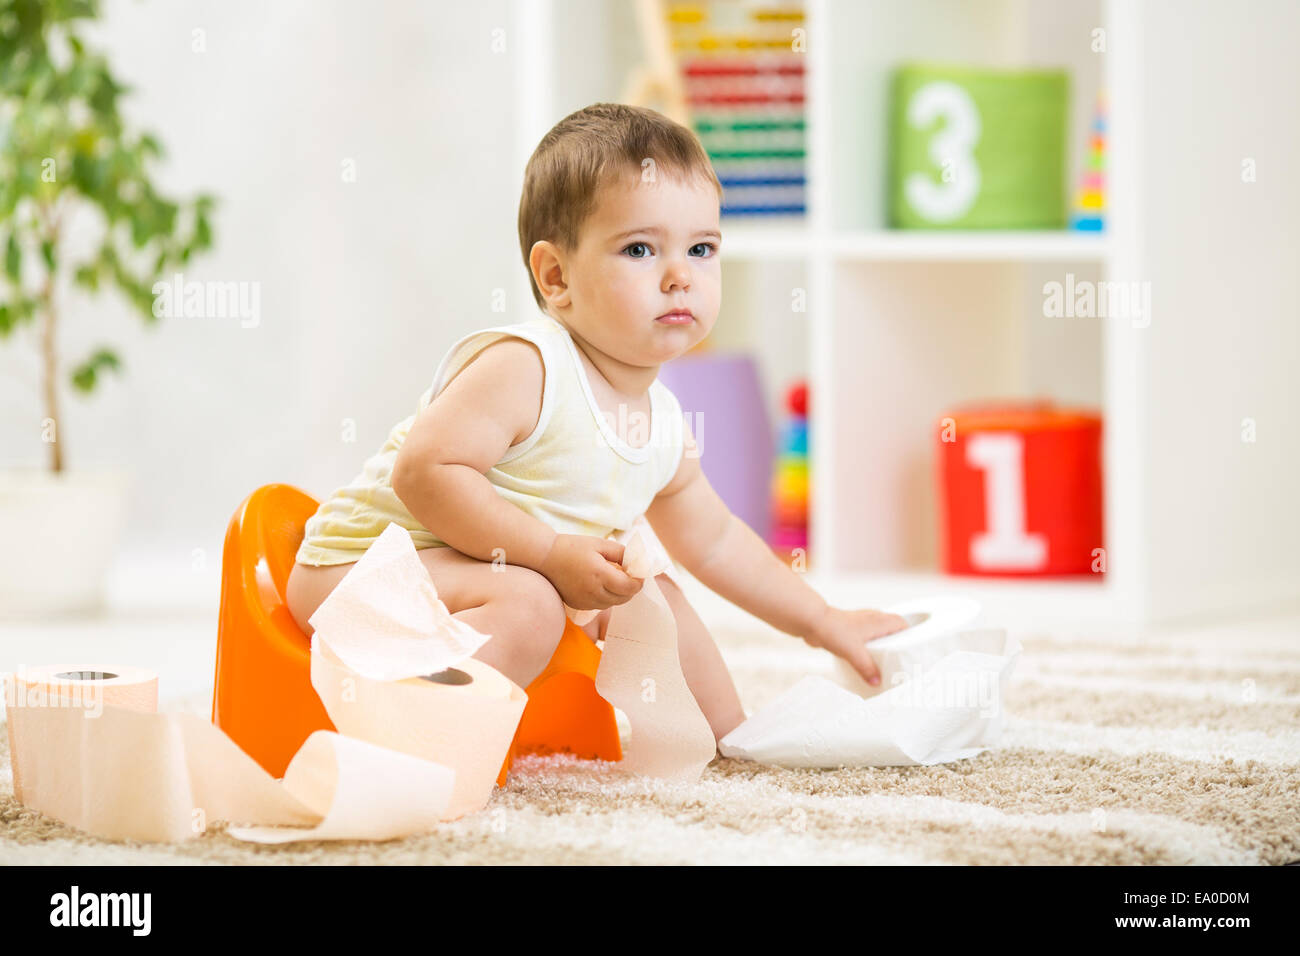 kid boy sitting on chamber pot with toilet paper Stock Photo